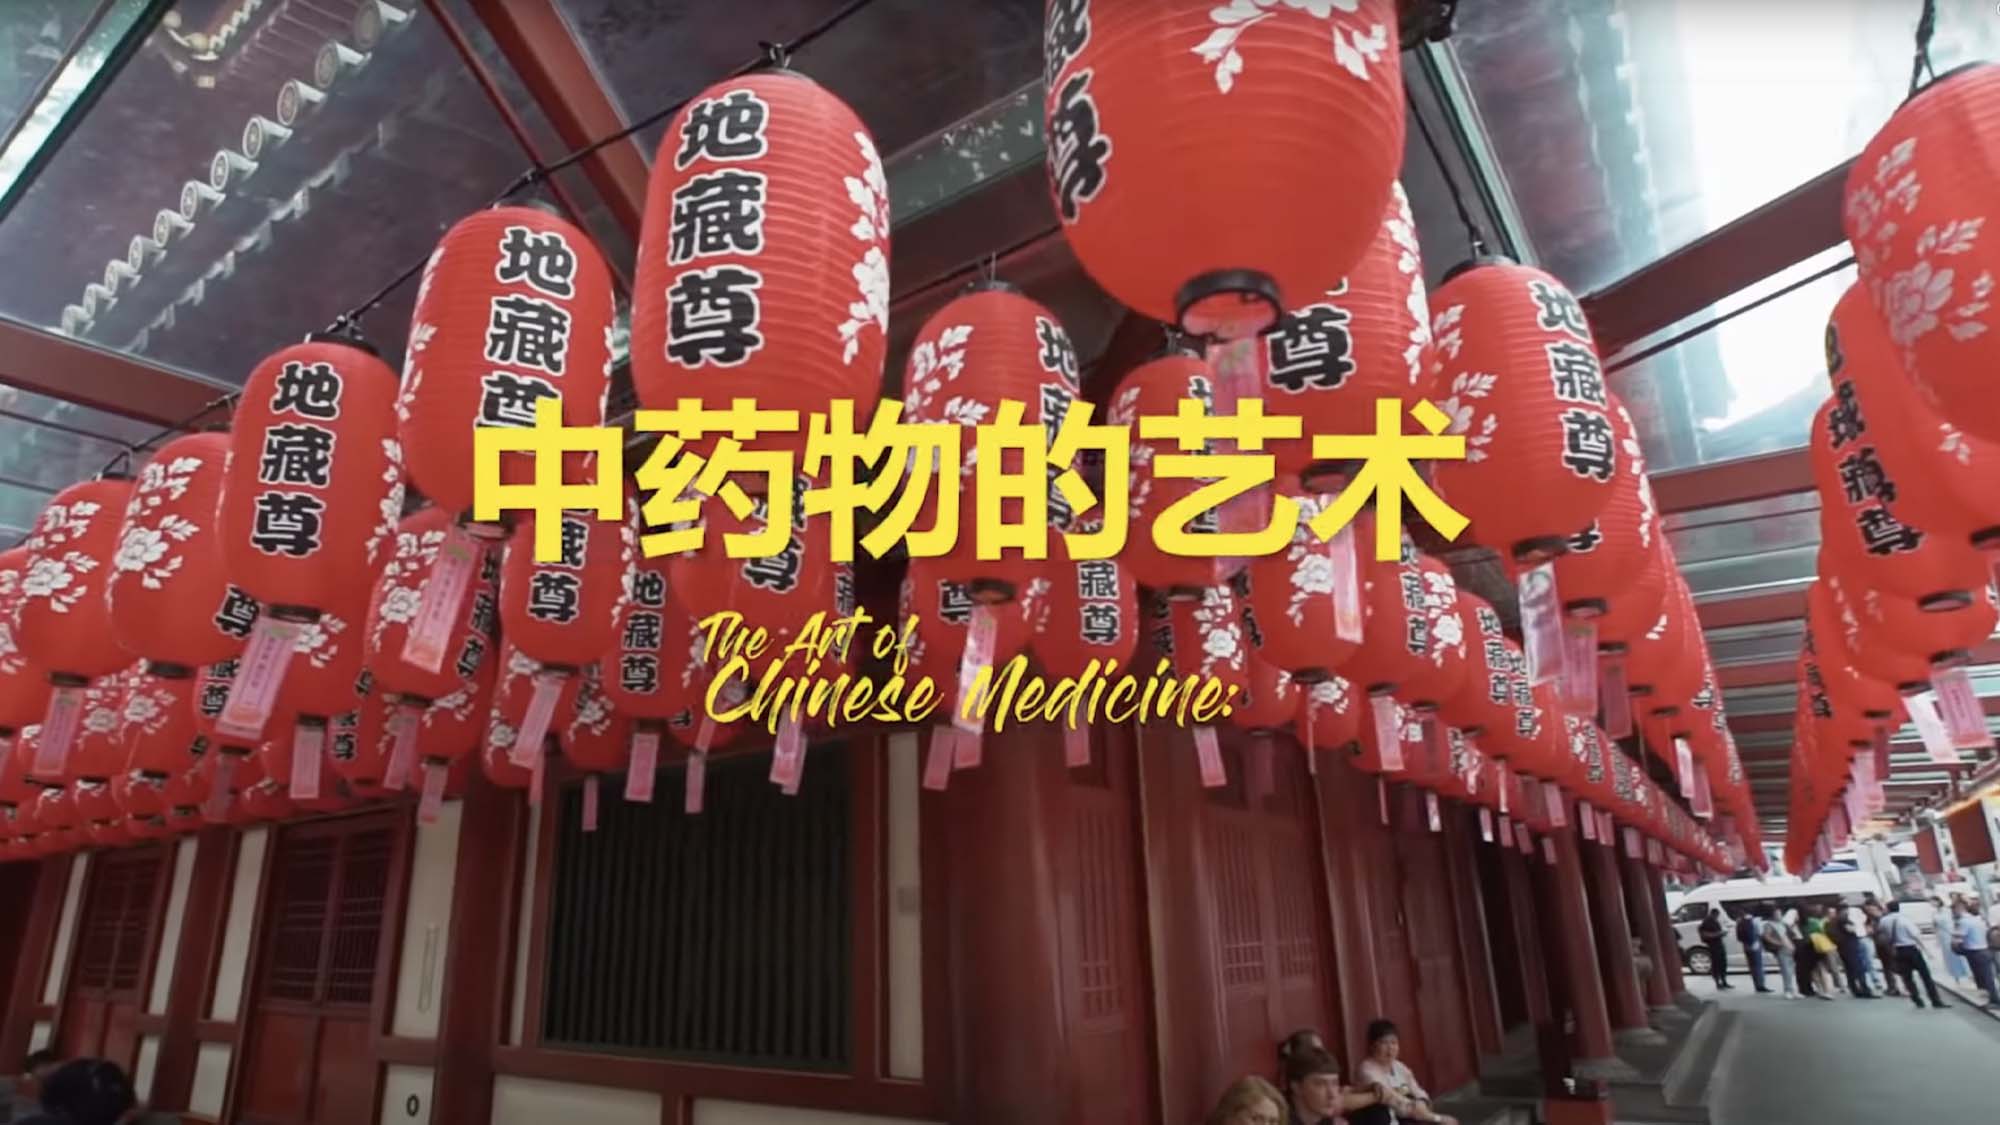 The Art of Chinese Medicine Singapore Video Production Video editing